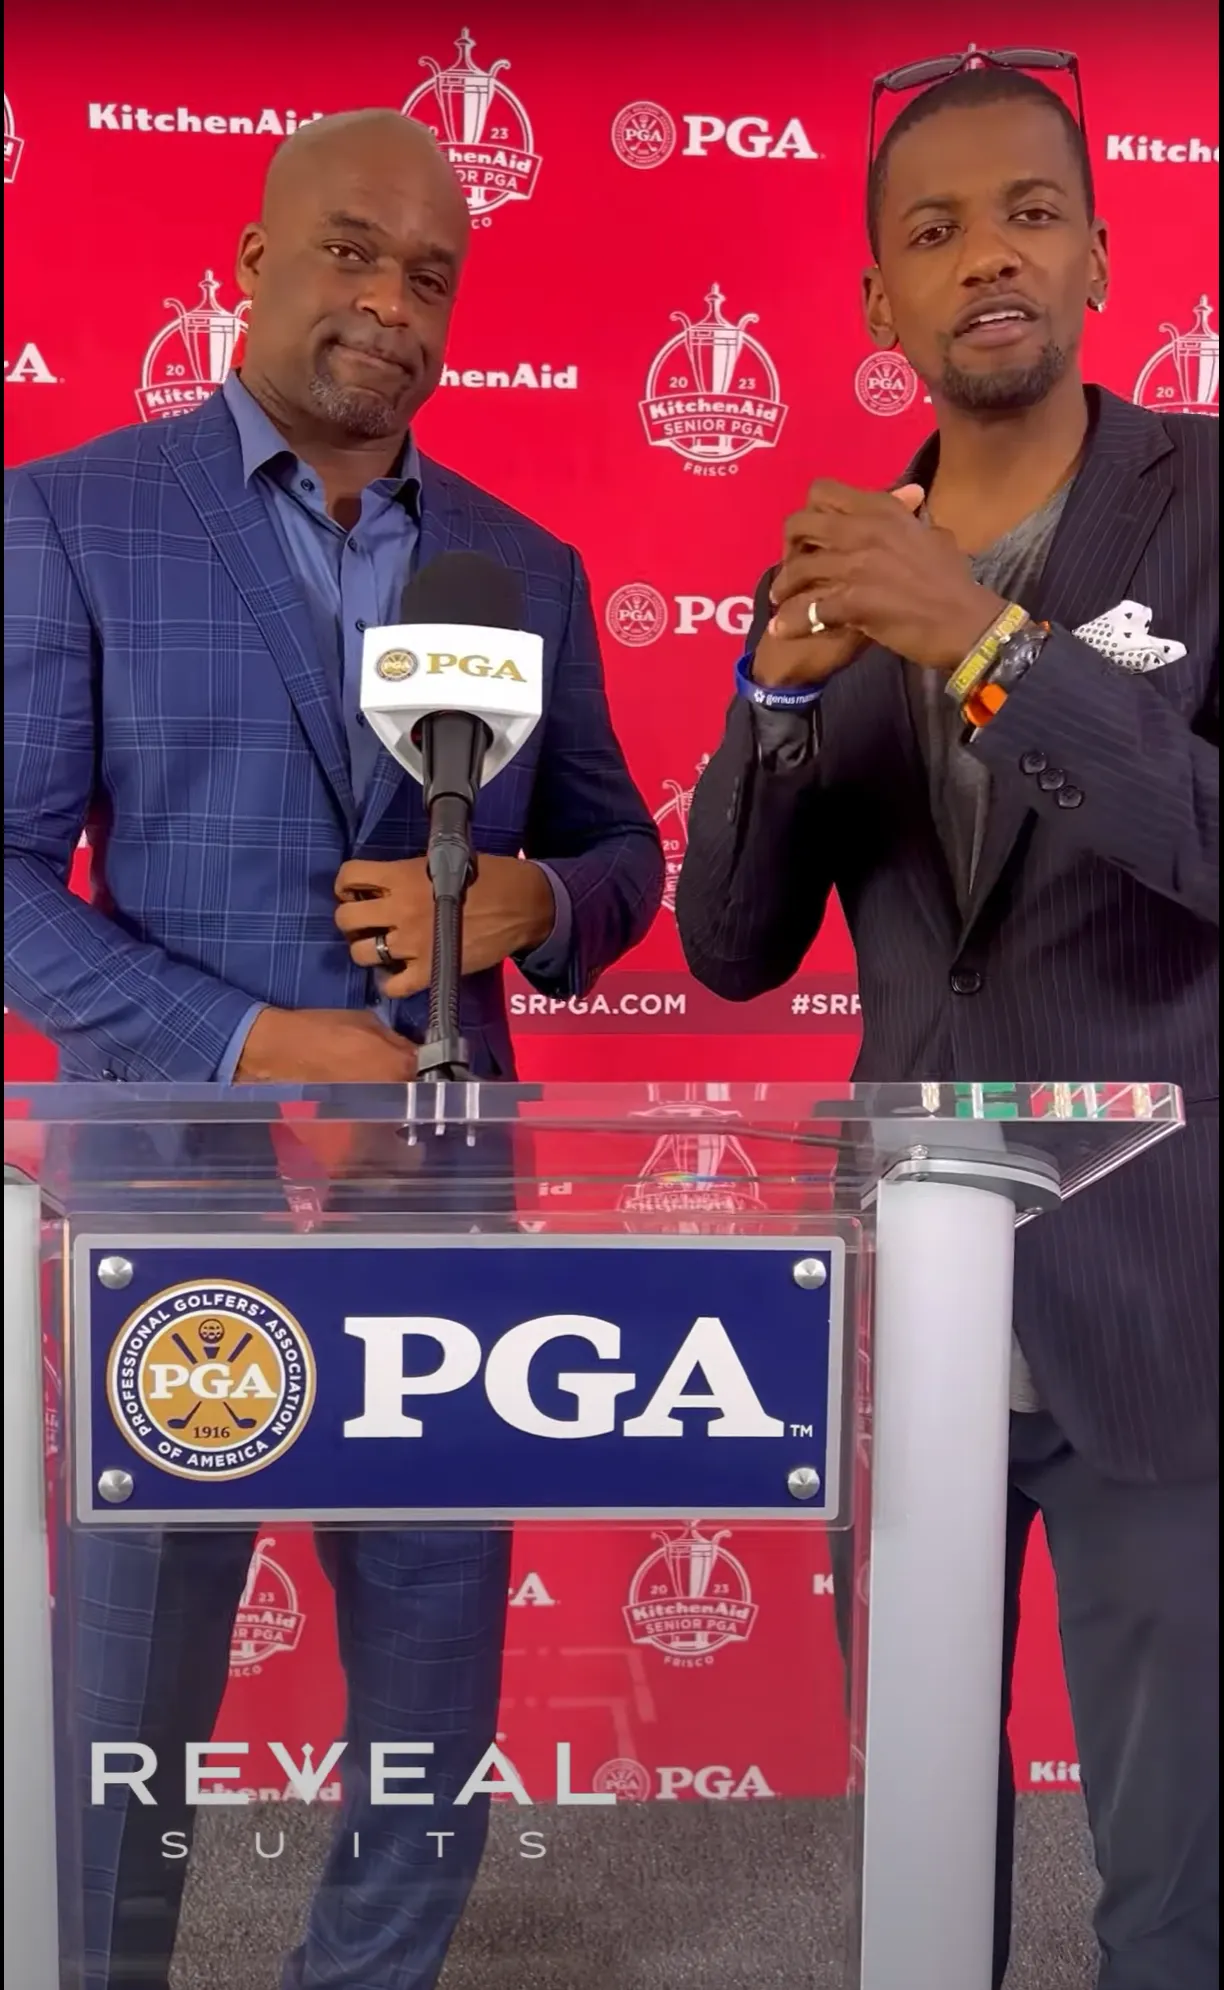 Carlton being interviewed in PGA event.